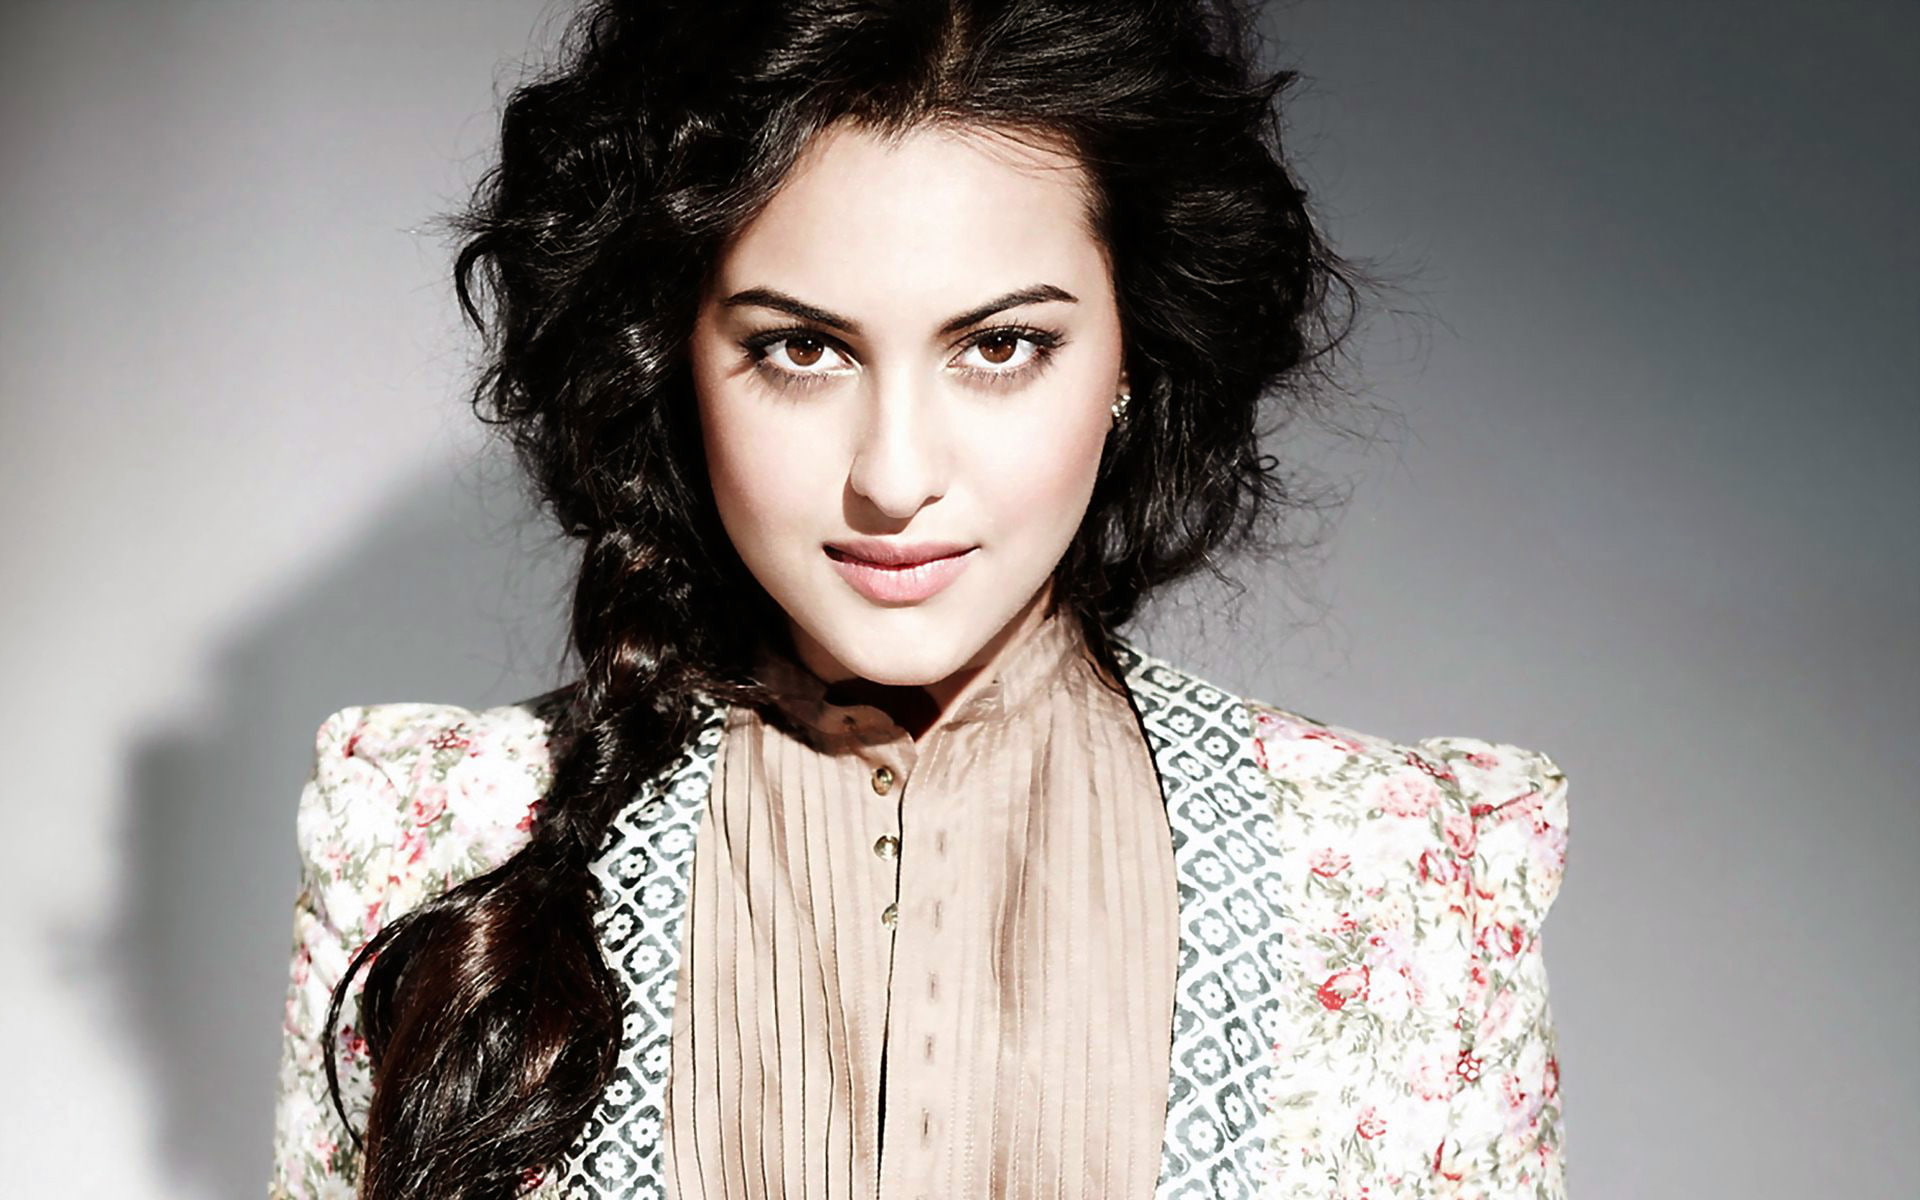 Sonakshi Sinha 23, hair, portrait, one person, young adult, front view